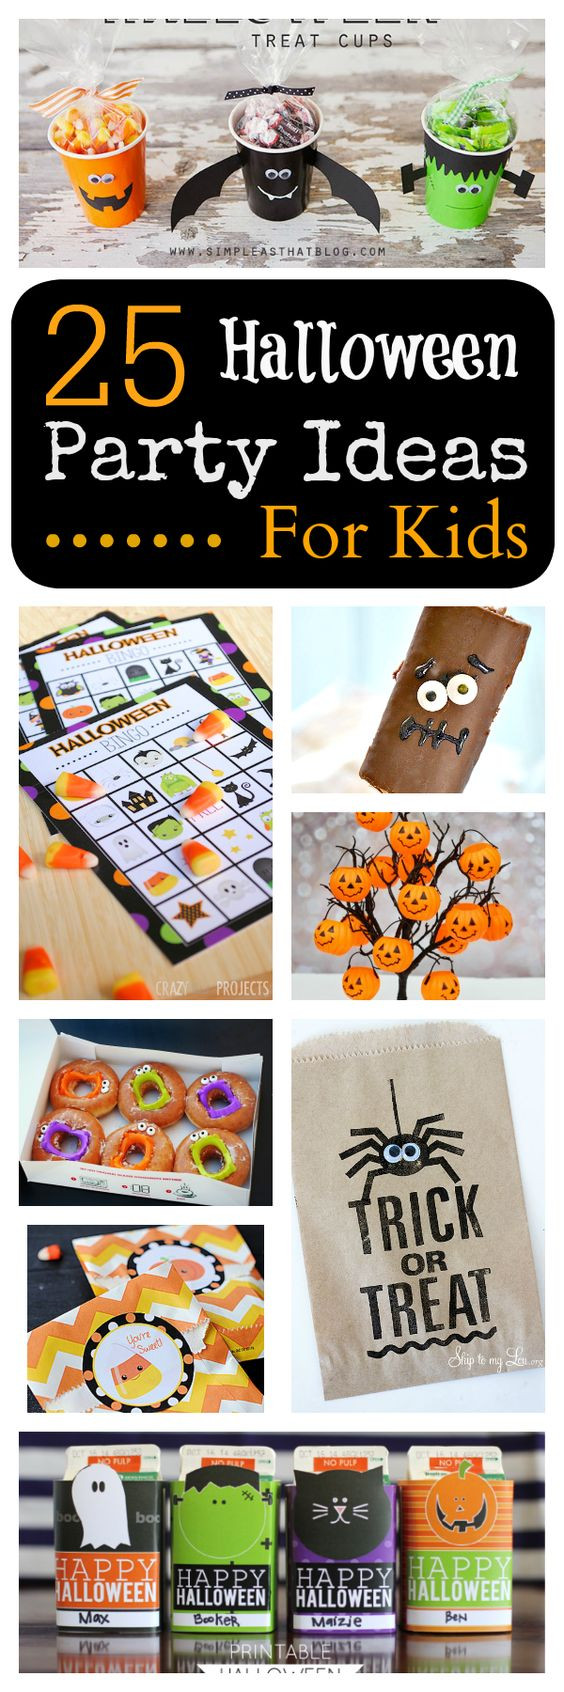 Halloween Party Game Ideas For Teenagers
 25 School Halloween Party Ideas for Kids